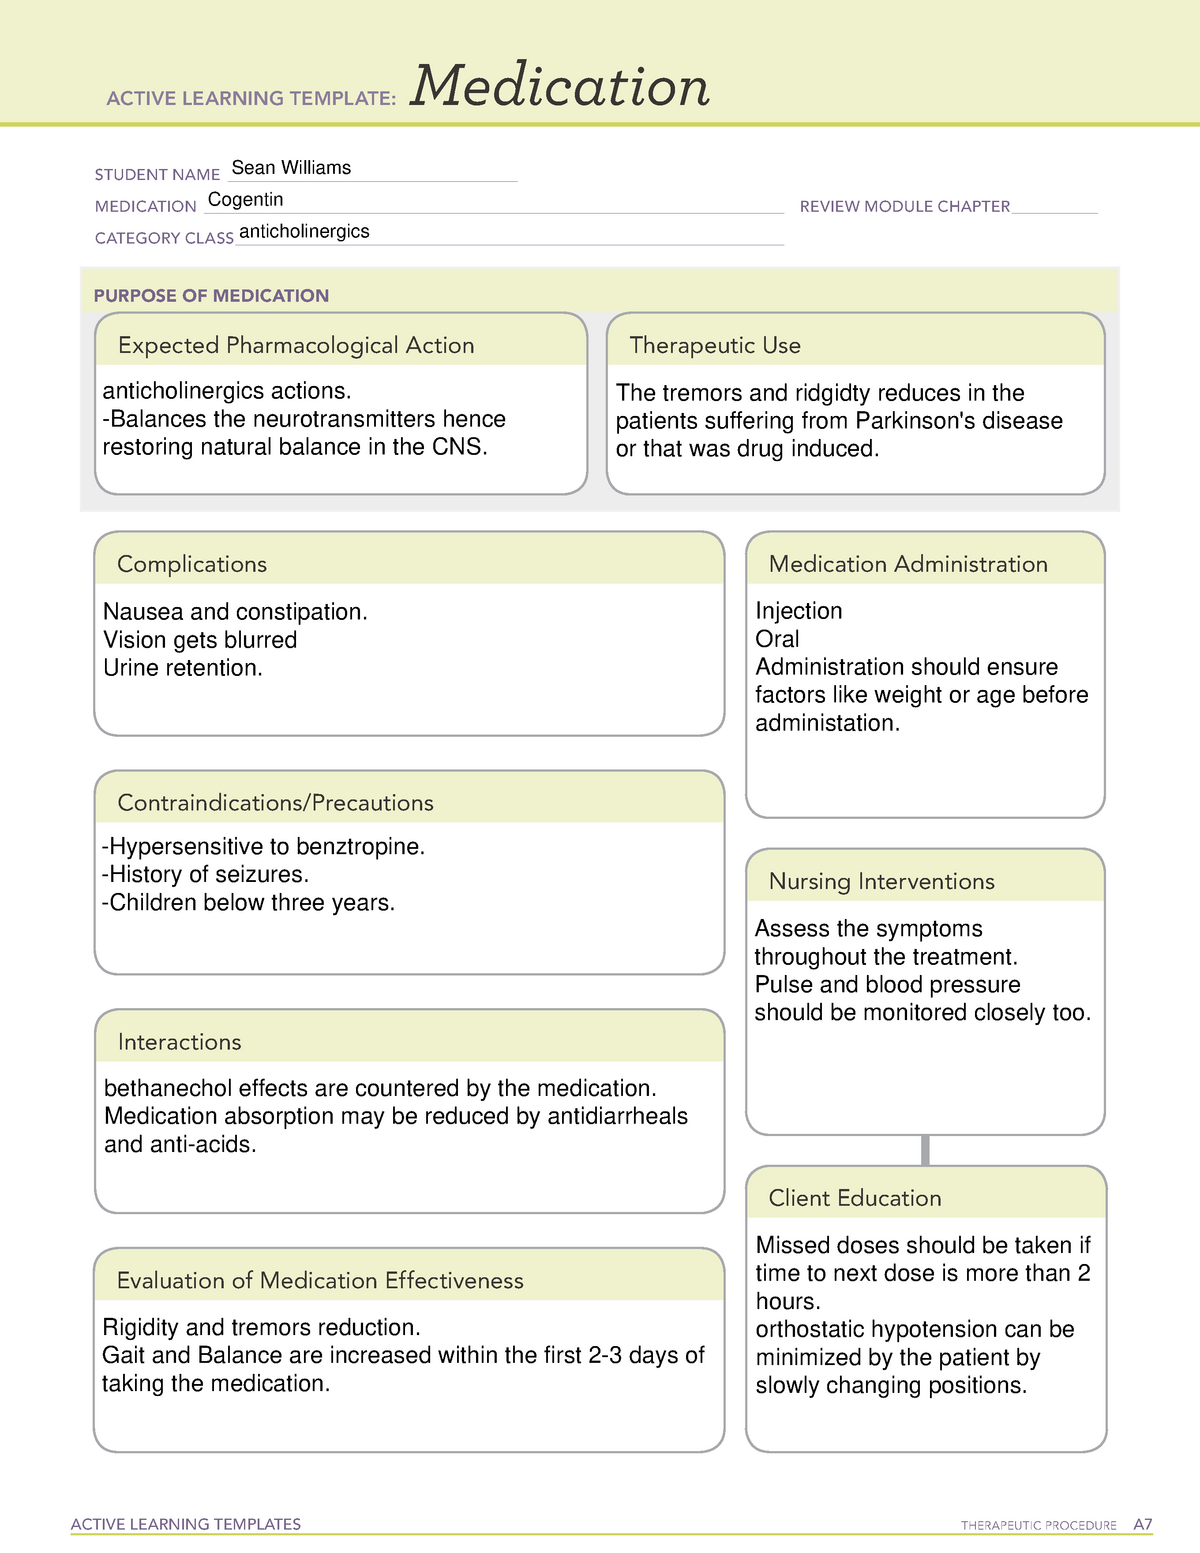 ATI Medication Template Cogentin - ACTIVE LEARNING TEMPLATES ...